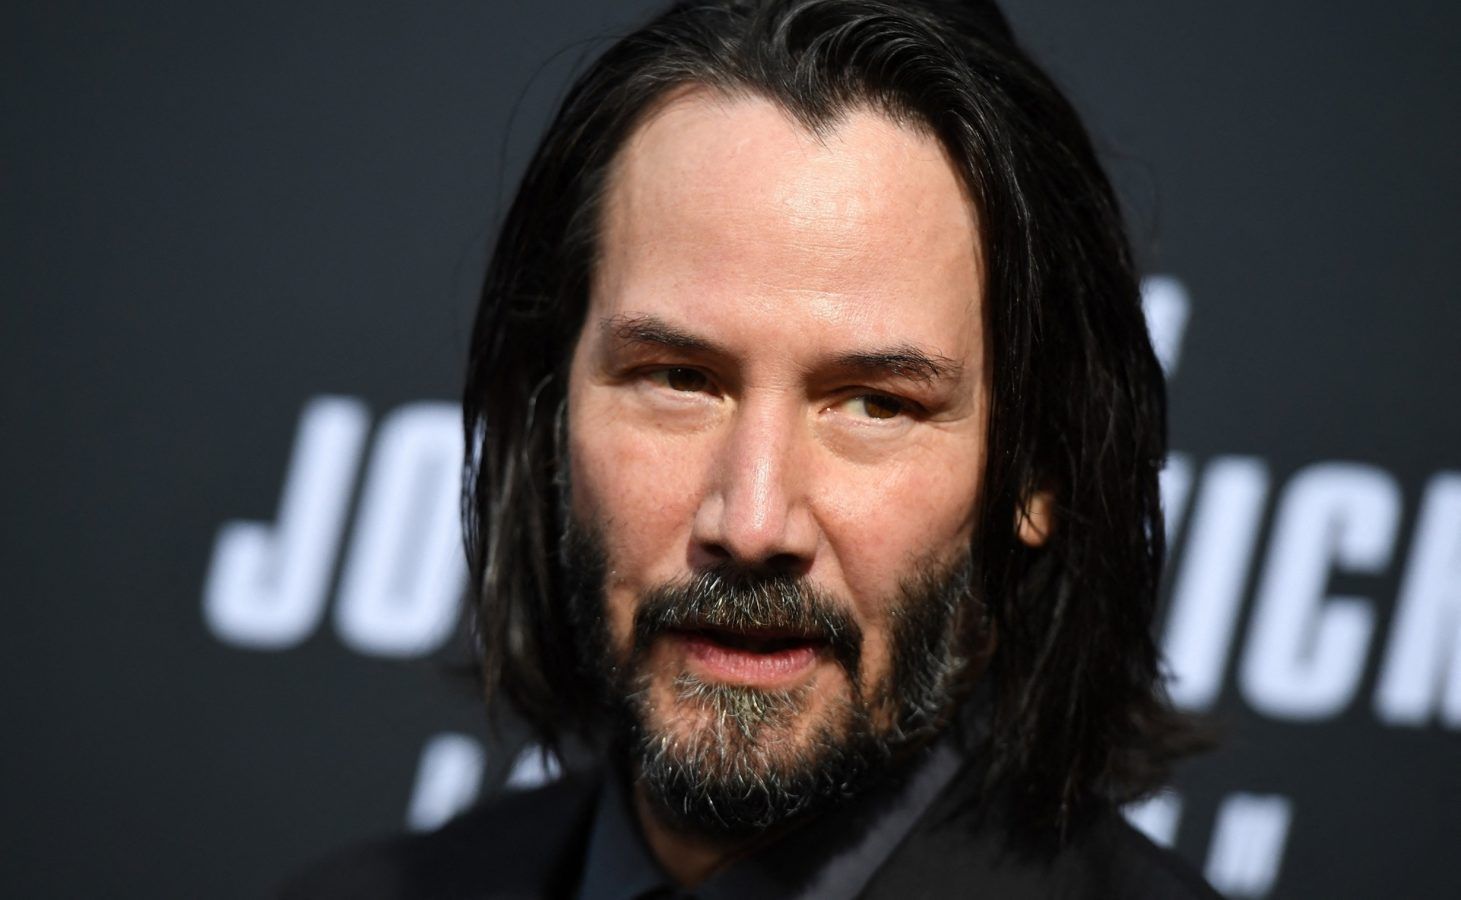 Keanu Reeves' John Wick: Chapter 4 won't be released till 24 March 2023